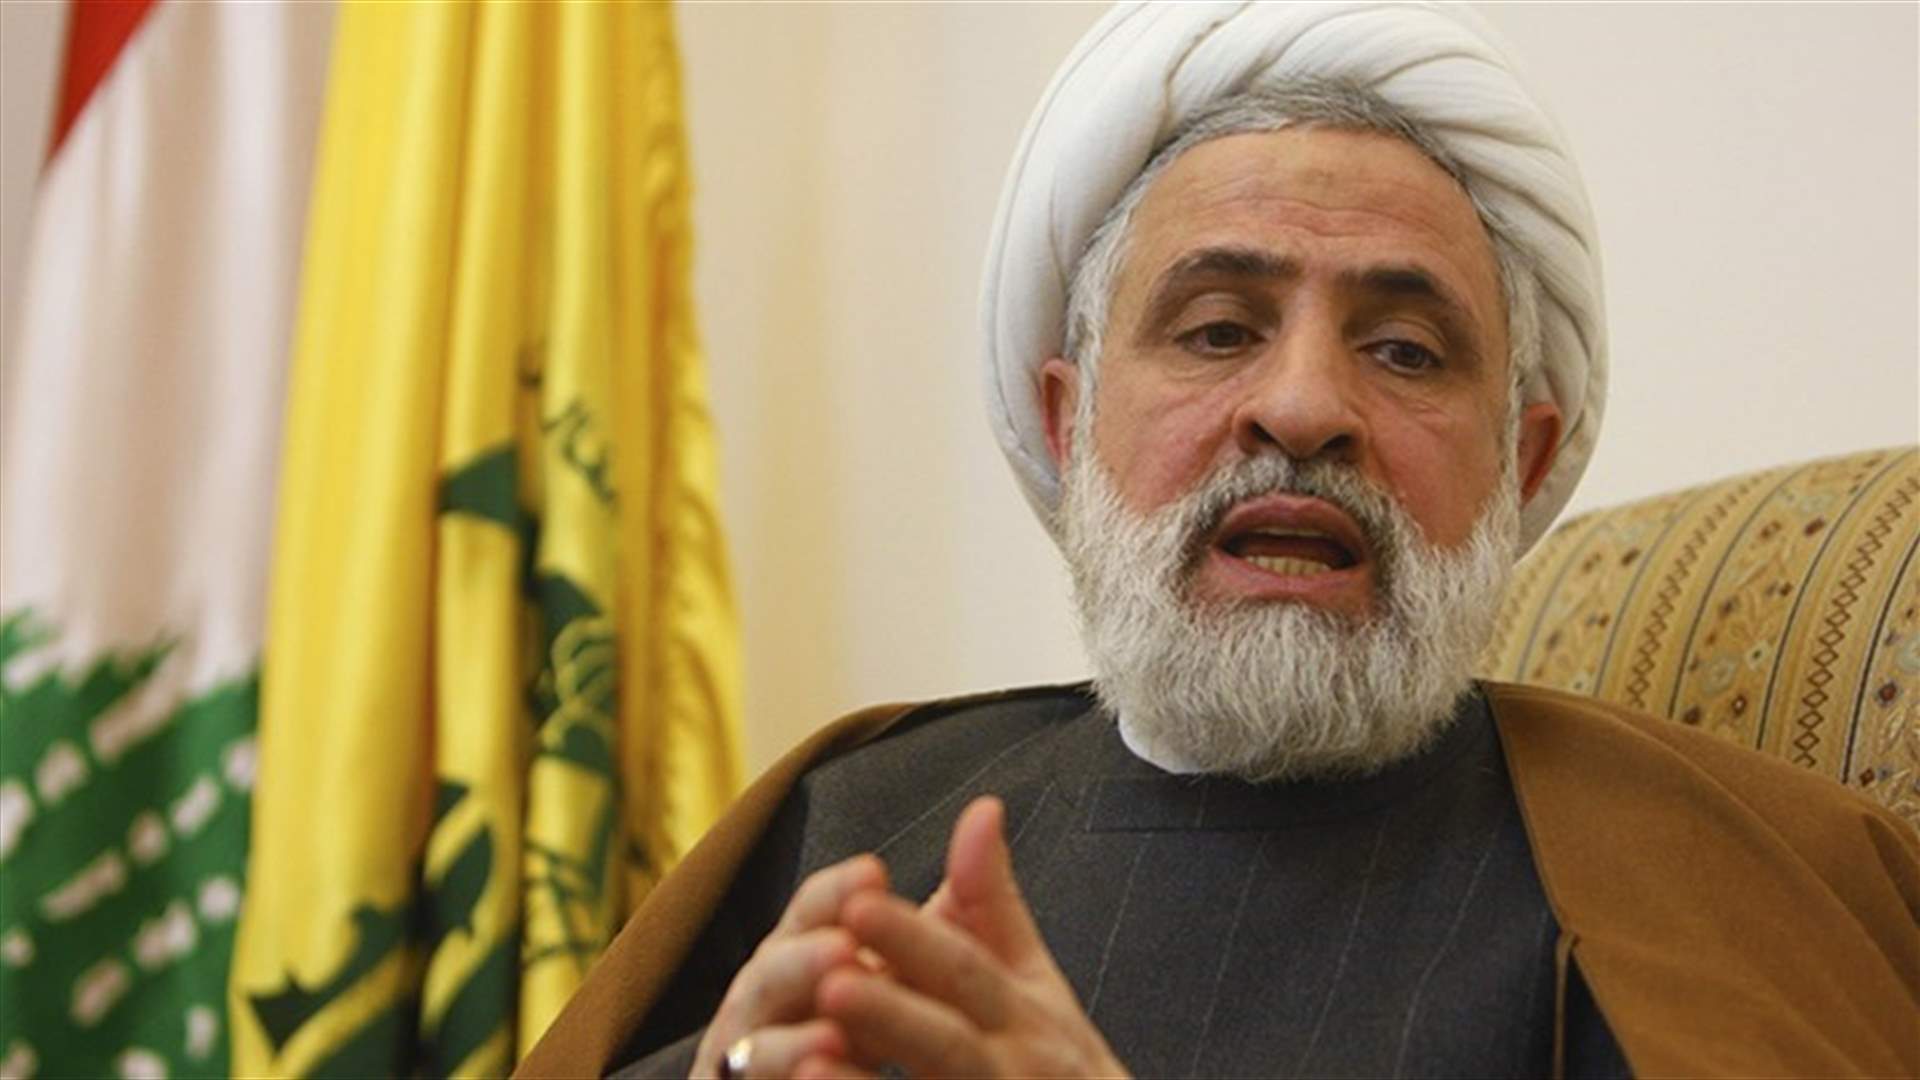 Sheikh Qassem: Justifying collaboration with enemy during a certain time period does not acquit the agent